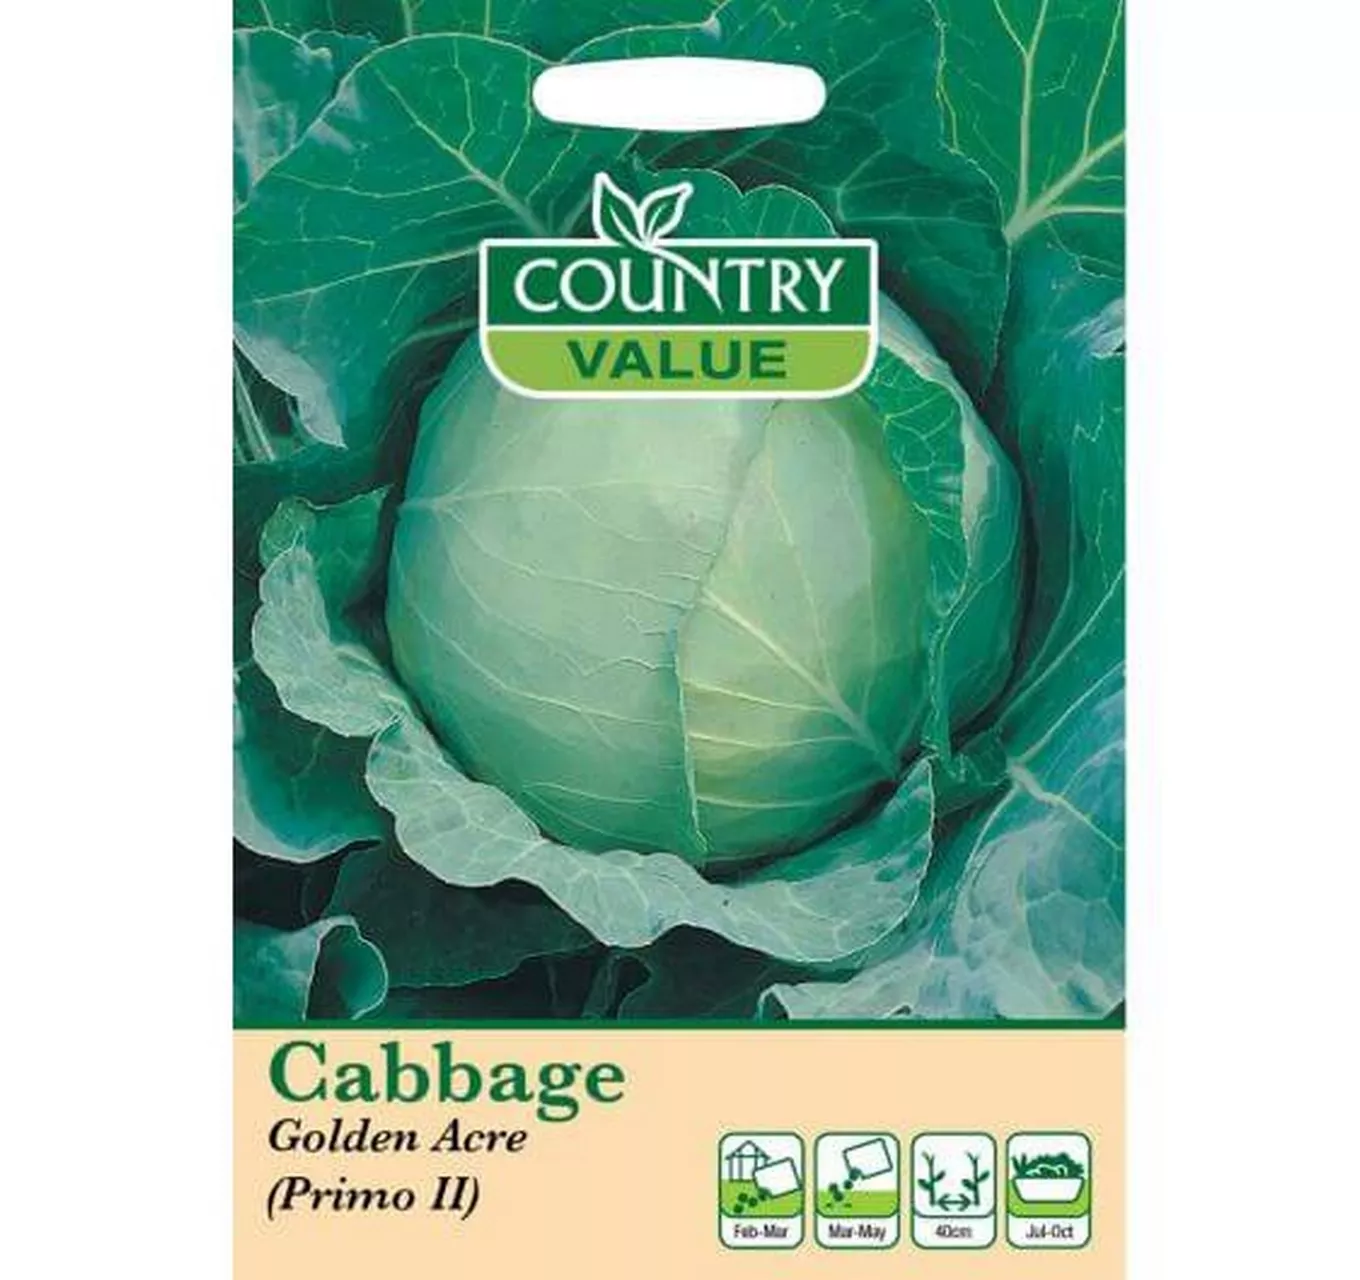 Cabbage Golden Acre (Pimo II)